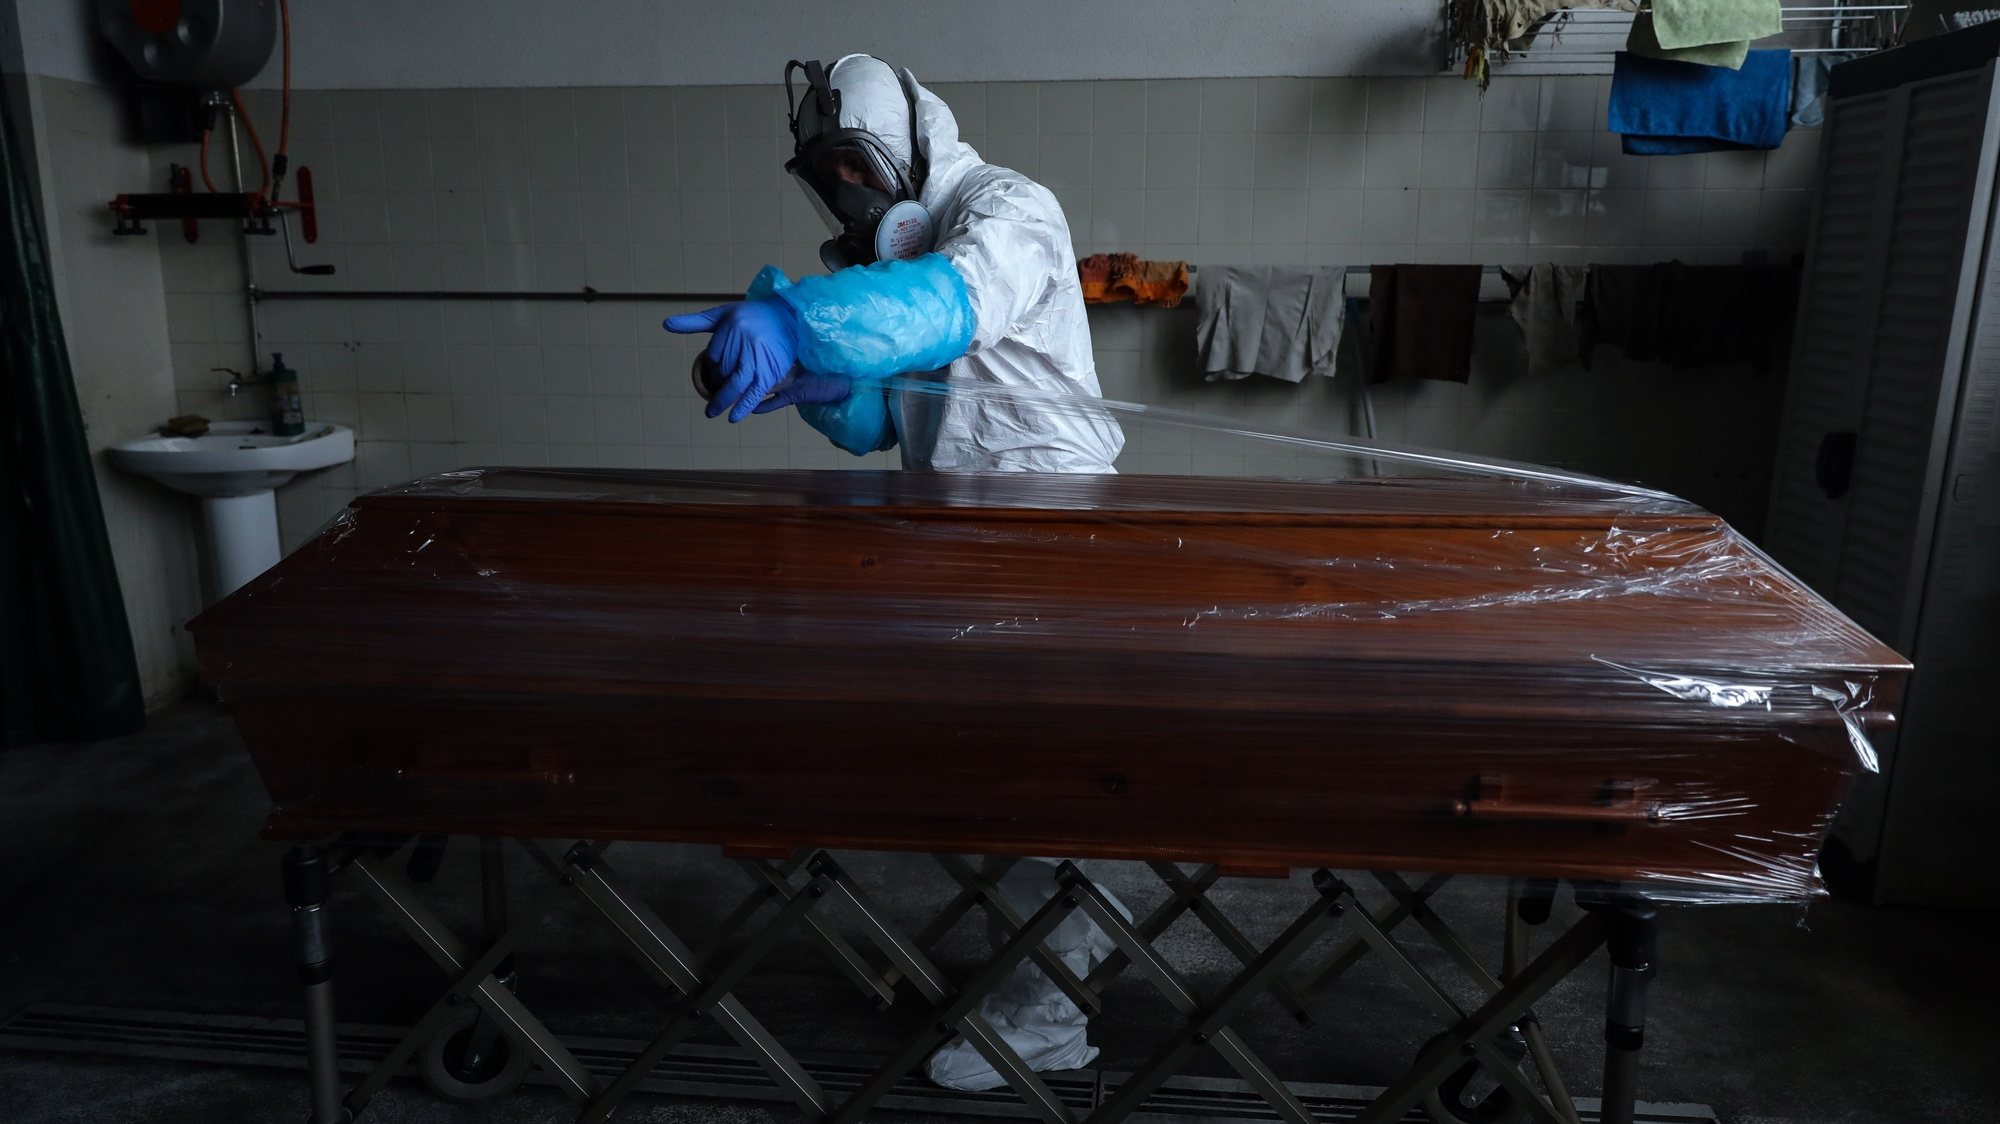 epa08347891 An employee of a funeral home fully protected with an integral mask and wearing protective suits against radioactive contamination and biological agents, covers with plastic wrap the coffin containing a body of a man over 80 years old who died in his home as a victim of covid-19, in Lisbon, Portugal, 03 April 2020 (Issued 07 April 2020). Portugal is in state of emergency until 17 April 2020. Countries around the world are taking increased measures to stem the widespread of the SARS-CoV-2 coronavirus which causes the Covid-19 disease.  EPA/MIGUEL A. LOPES  ATTENTION: This Image is part of a PHOTO SET